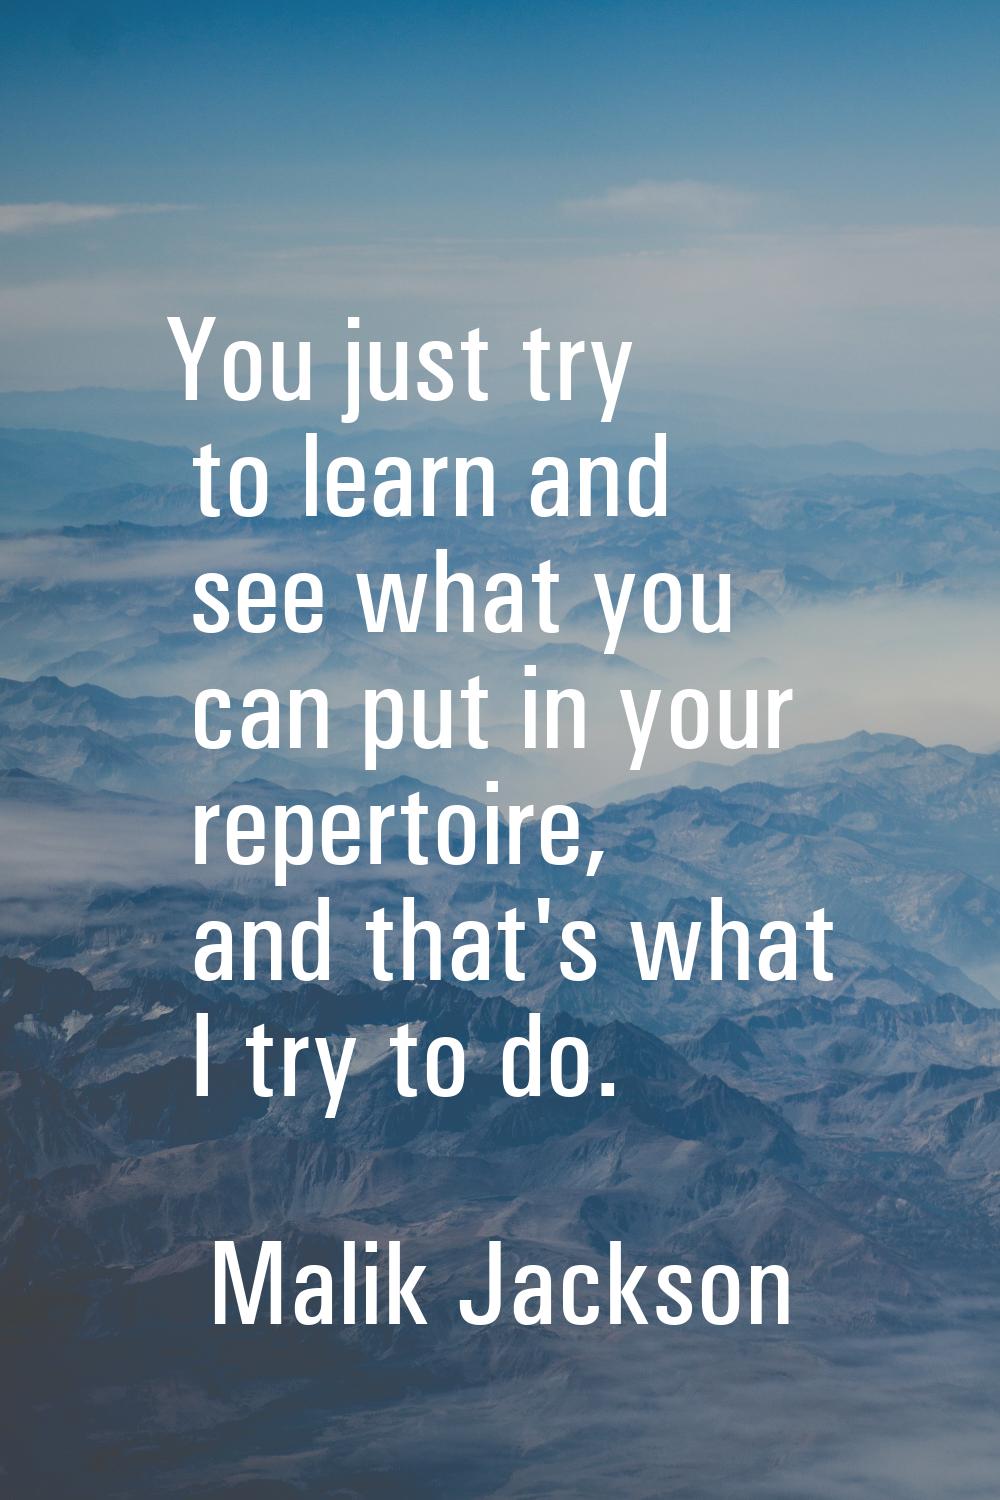 You just try to learn and see what you can put in your repertoire, and that's what I try to do.